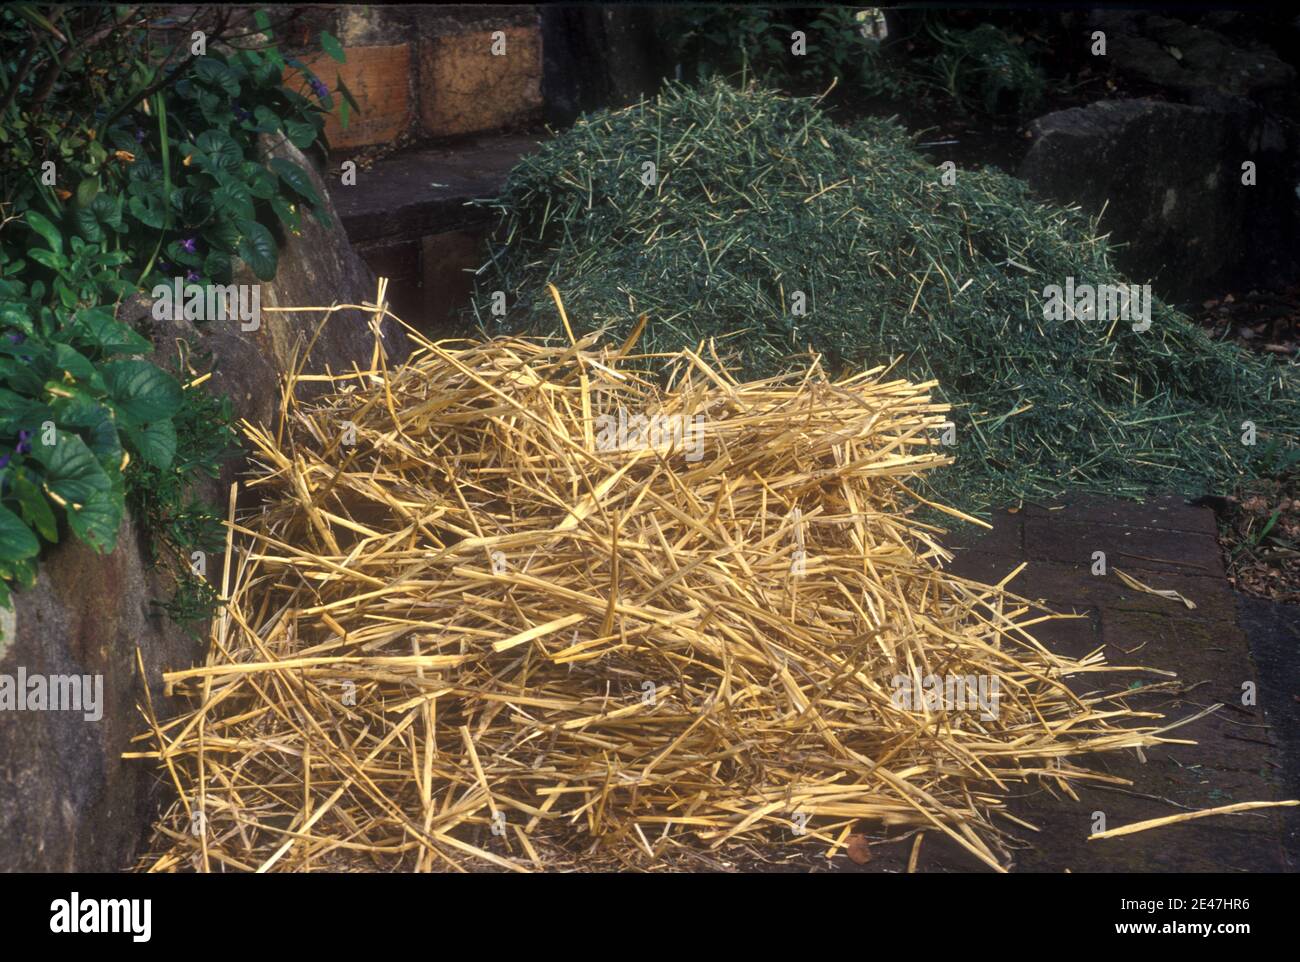 PILES OF STRAW AND GRASS CLIPPINGS READY TO BE USED FOR GARDEN MULCH. ORGANIC MULCHES DECAY OVER TIME AND ARE TEMPORARY. Stock Photo